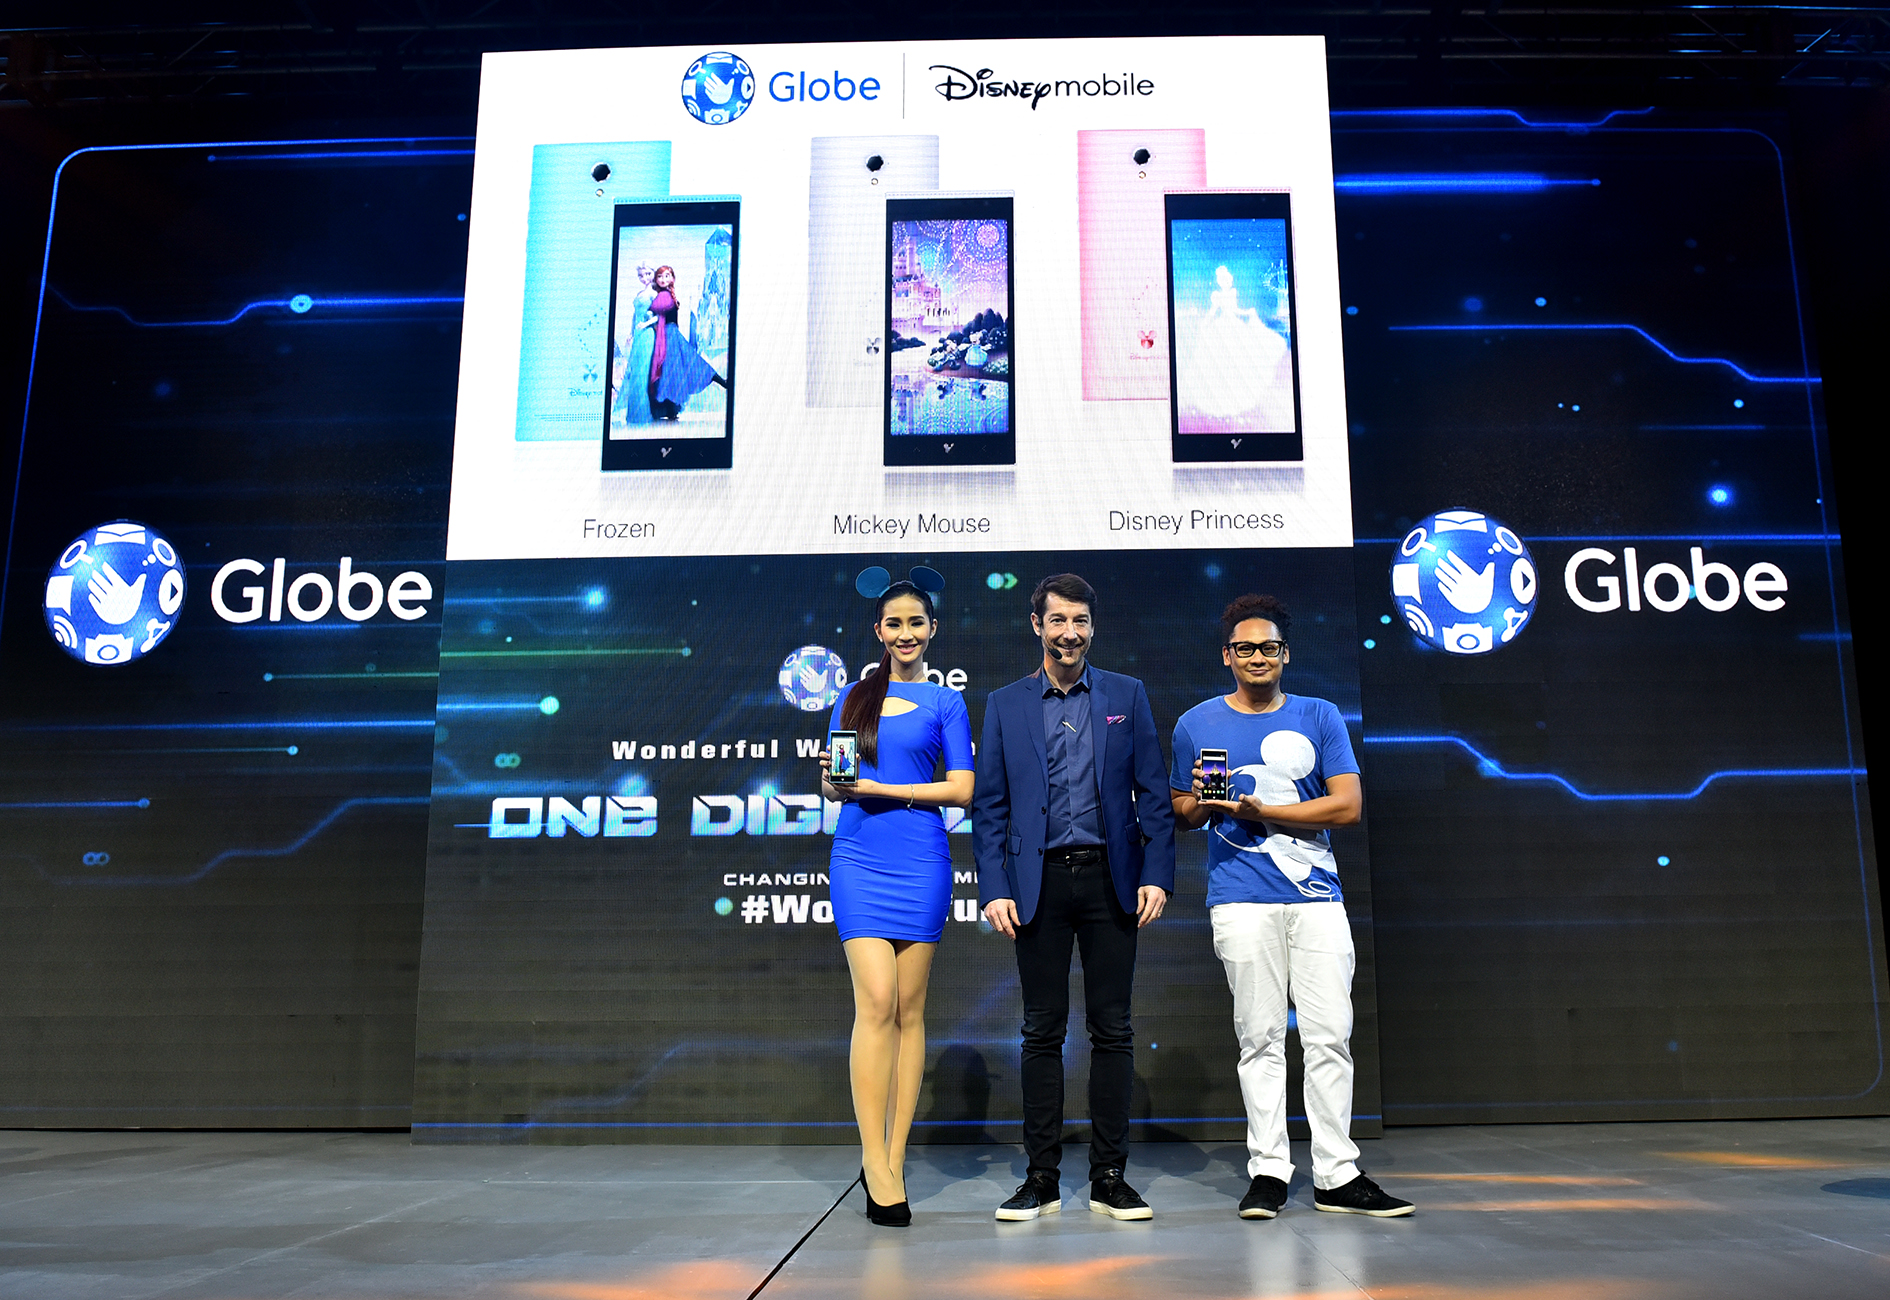 The Walt Disney Company Southeast Asia and Globe Telecom launched Southeast Asia’s first Disney Mobile smartphone. Globe Telecom will be the first telco in Southeast Asia to offer Disney Mobile smartphones through its new myStarter postpaid plans. Source Image: Marketing Interactive